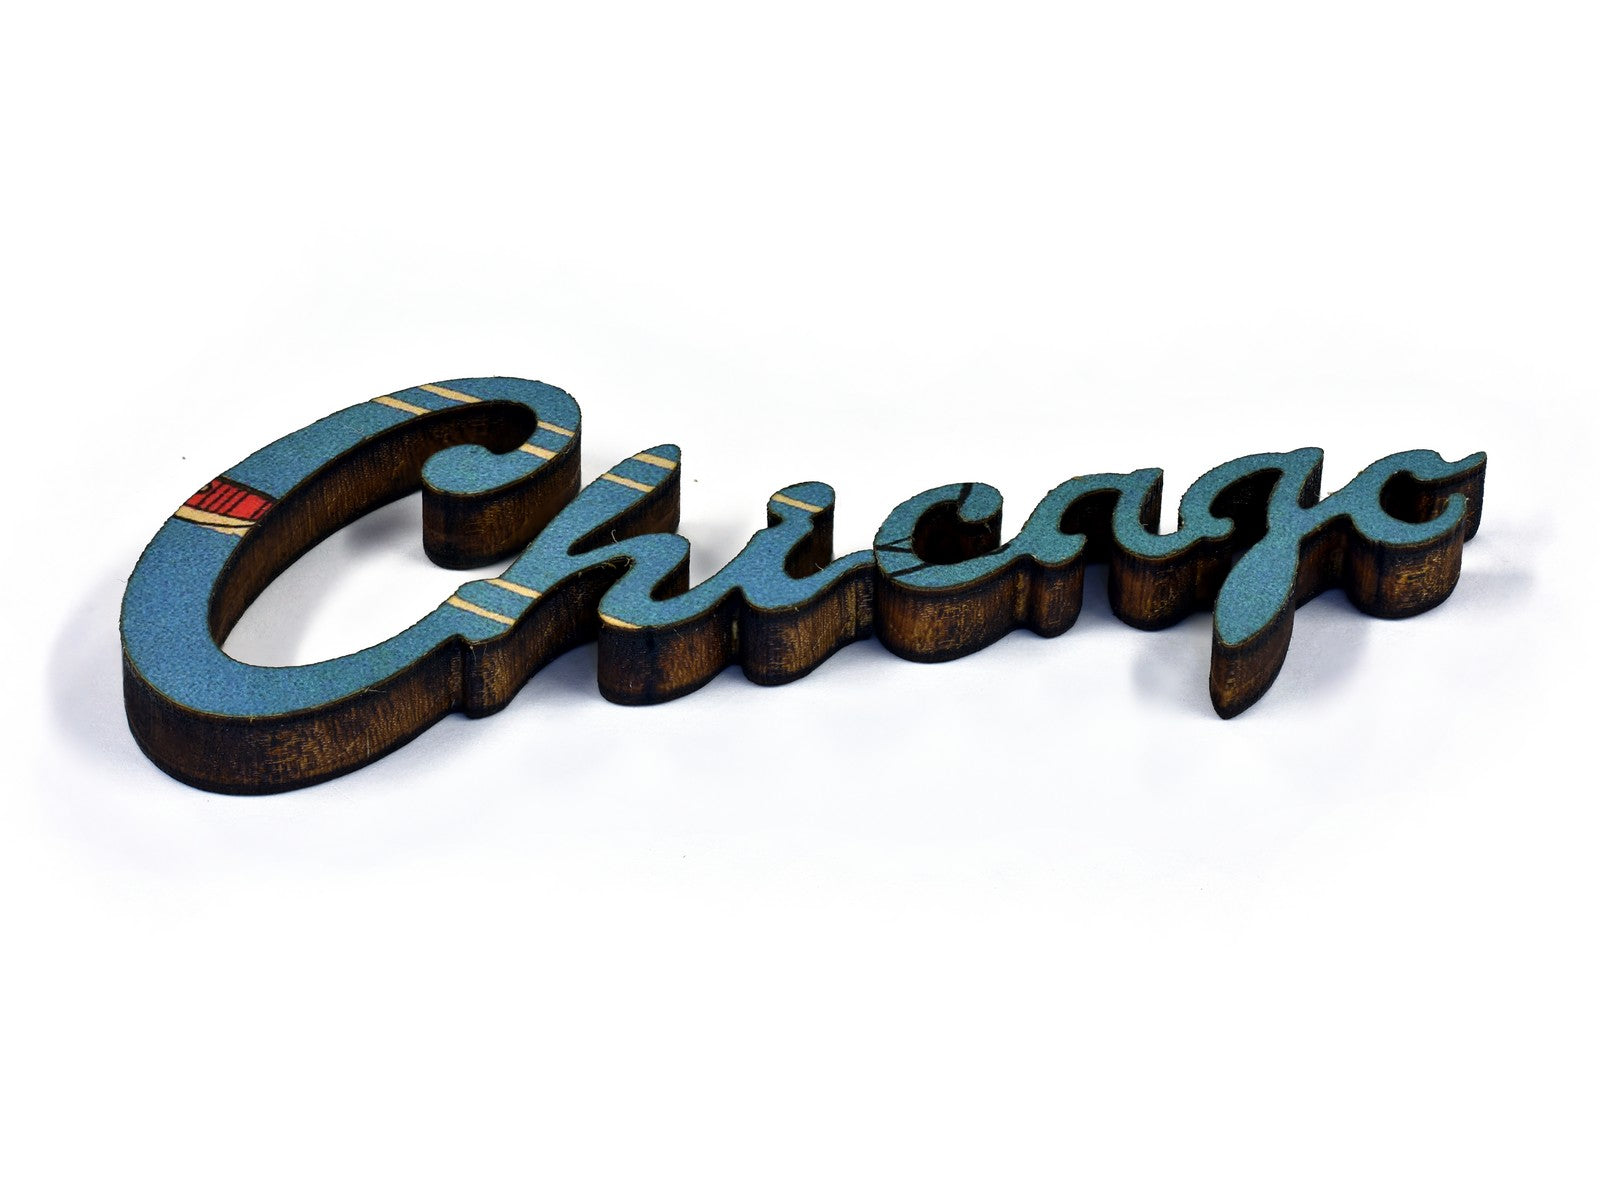 A closeup of pieces in the shape of the word "Chicago".